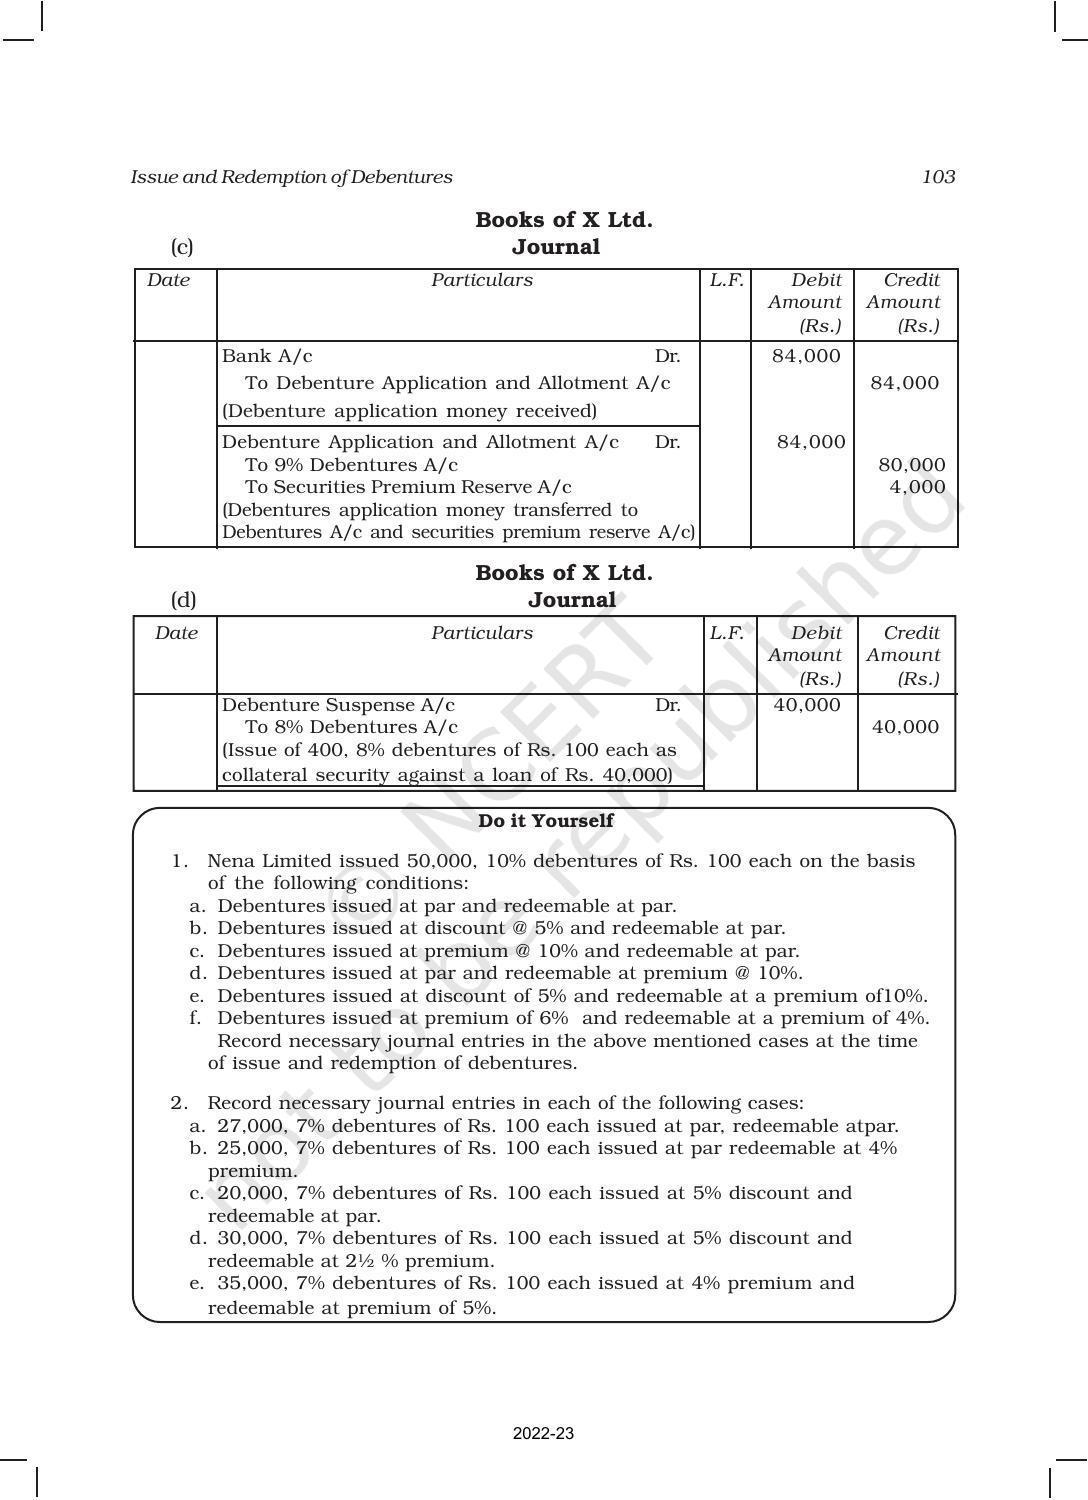 NCERT Book for Class 12 Accountancy Part II Chapter 1 Issue and Redemption of Debentures - Page 29